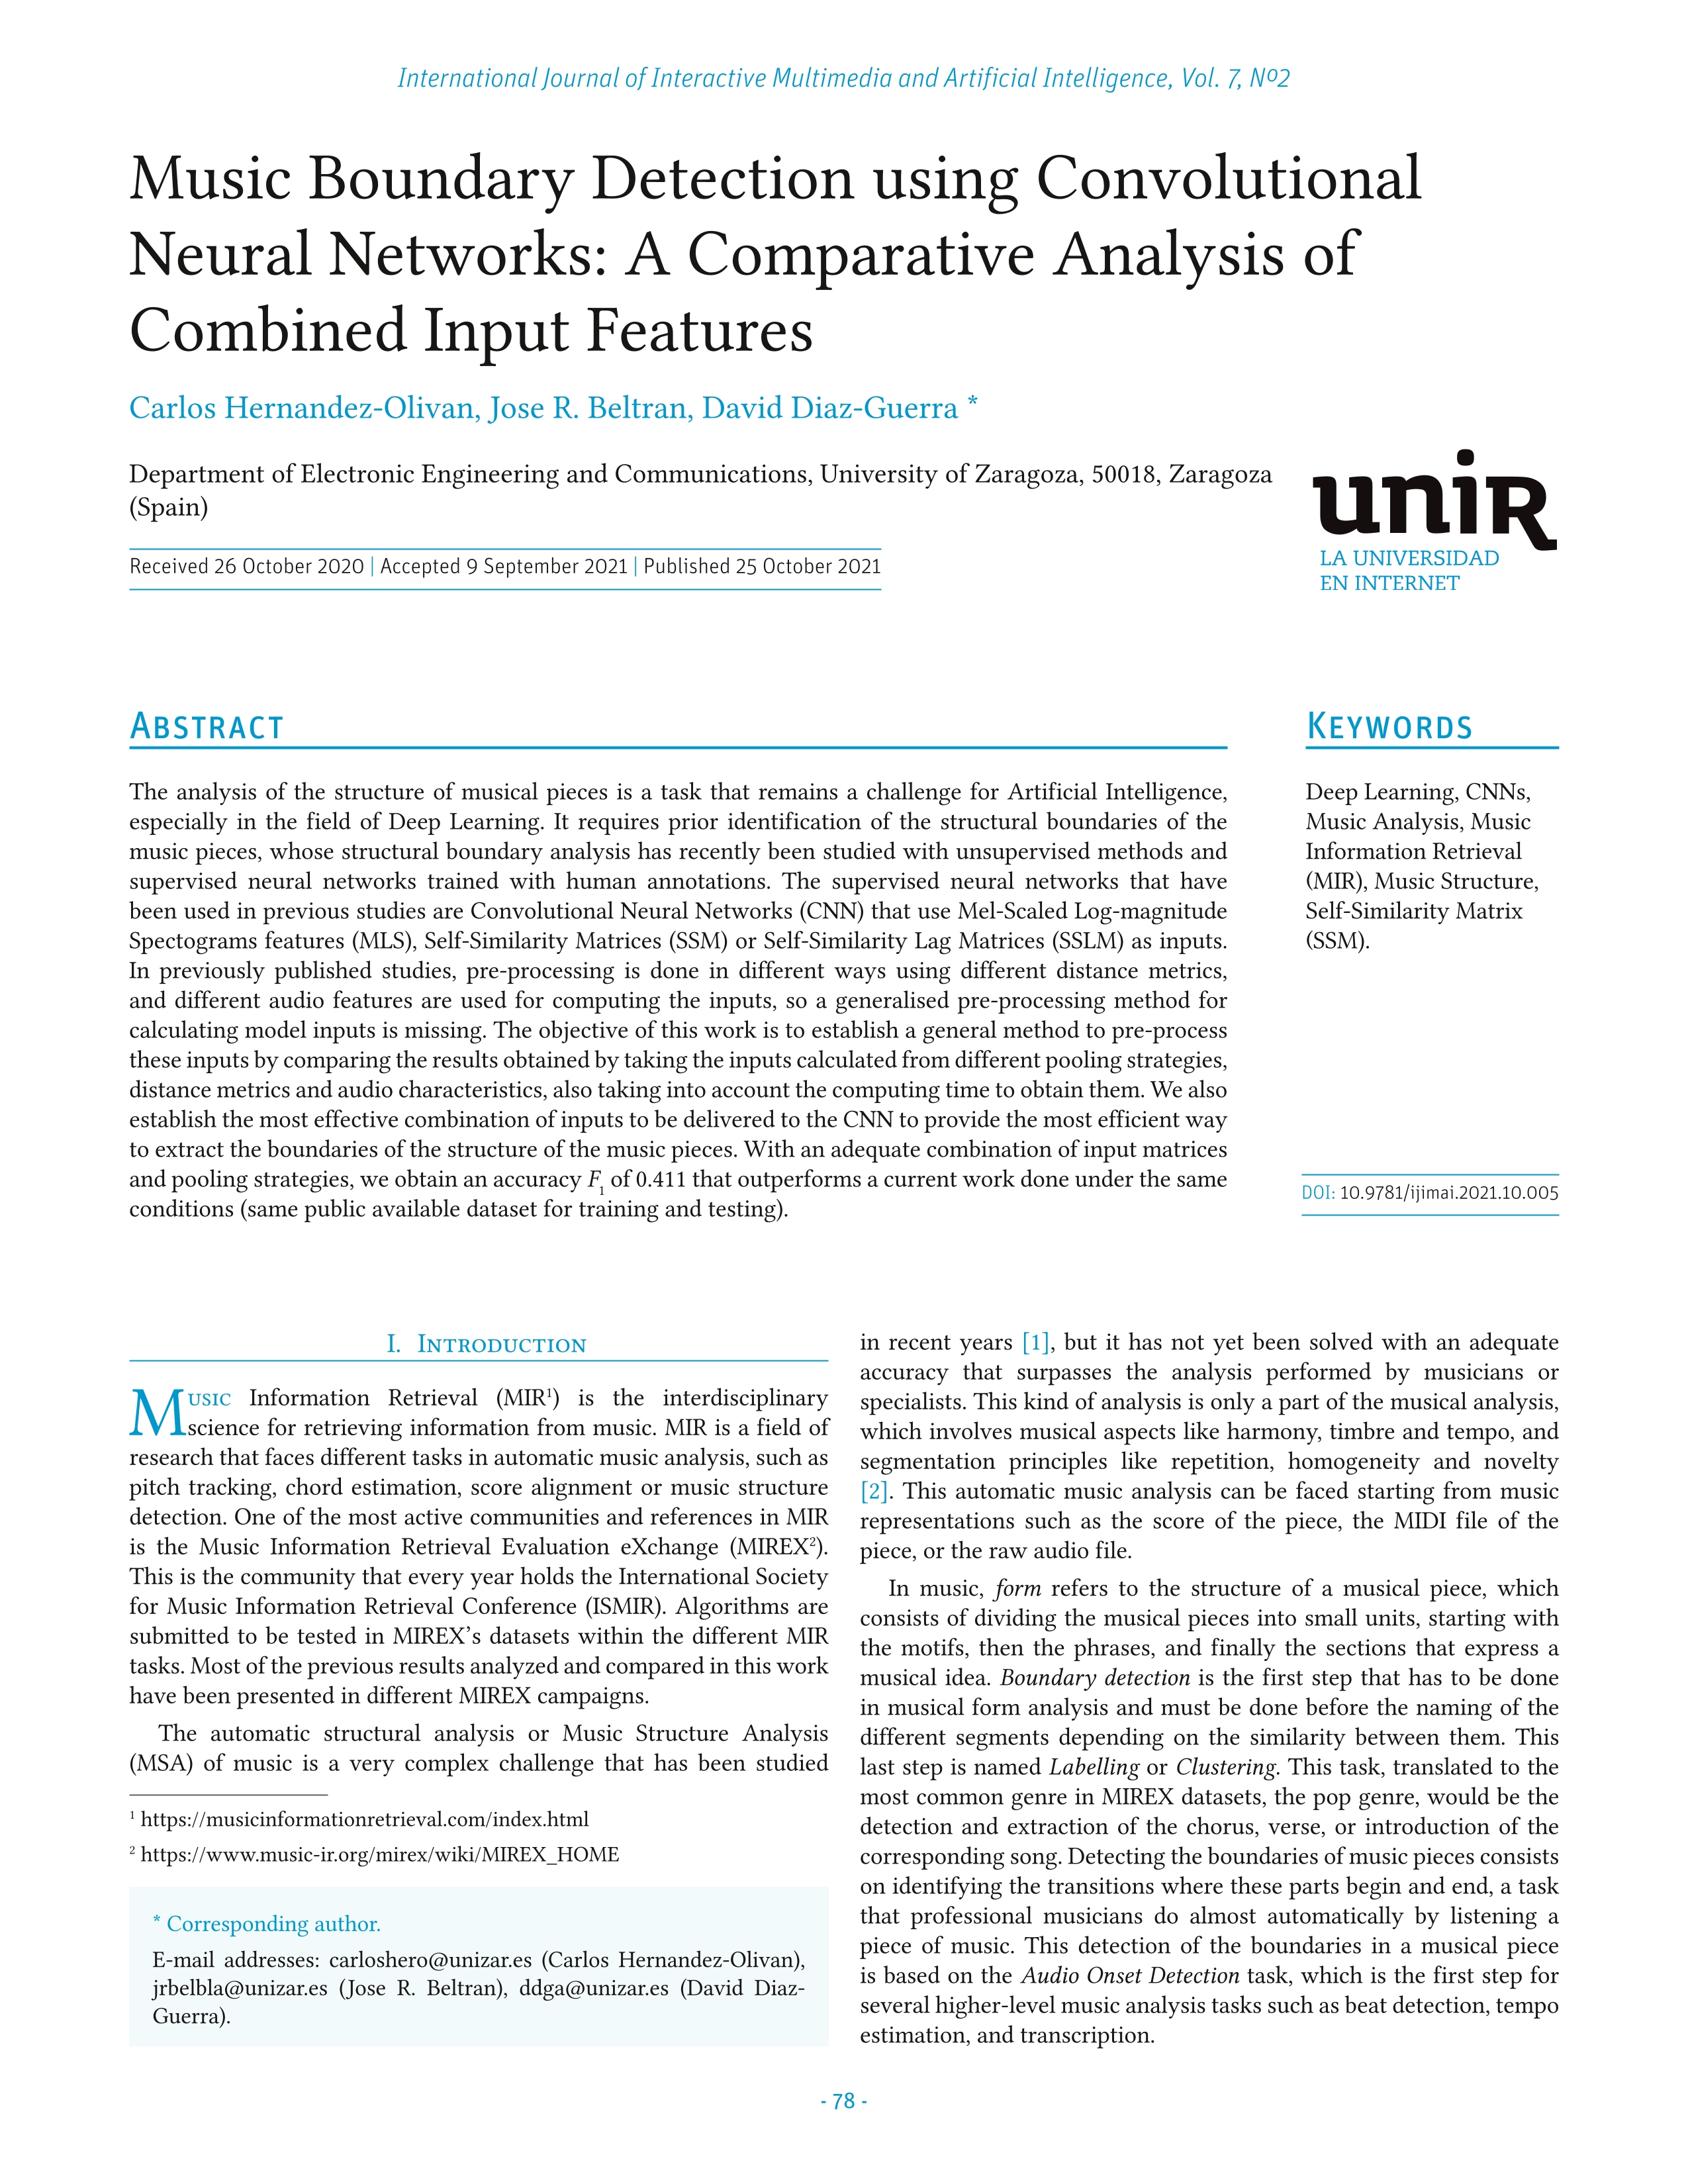 Music boundary detection using convolutional neural networks: a comparative analysis of combined input features